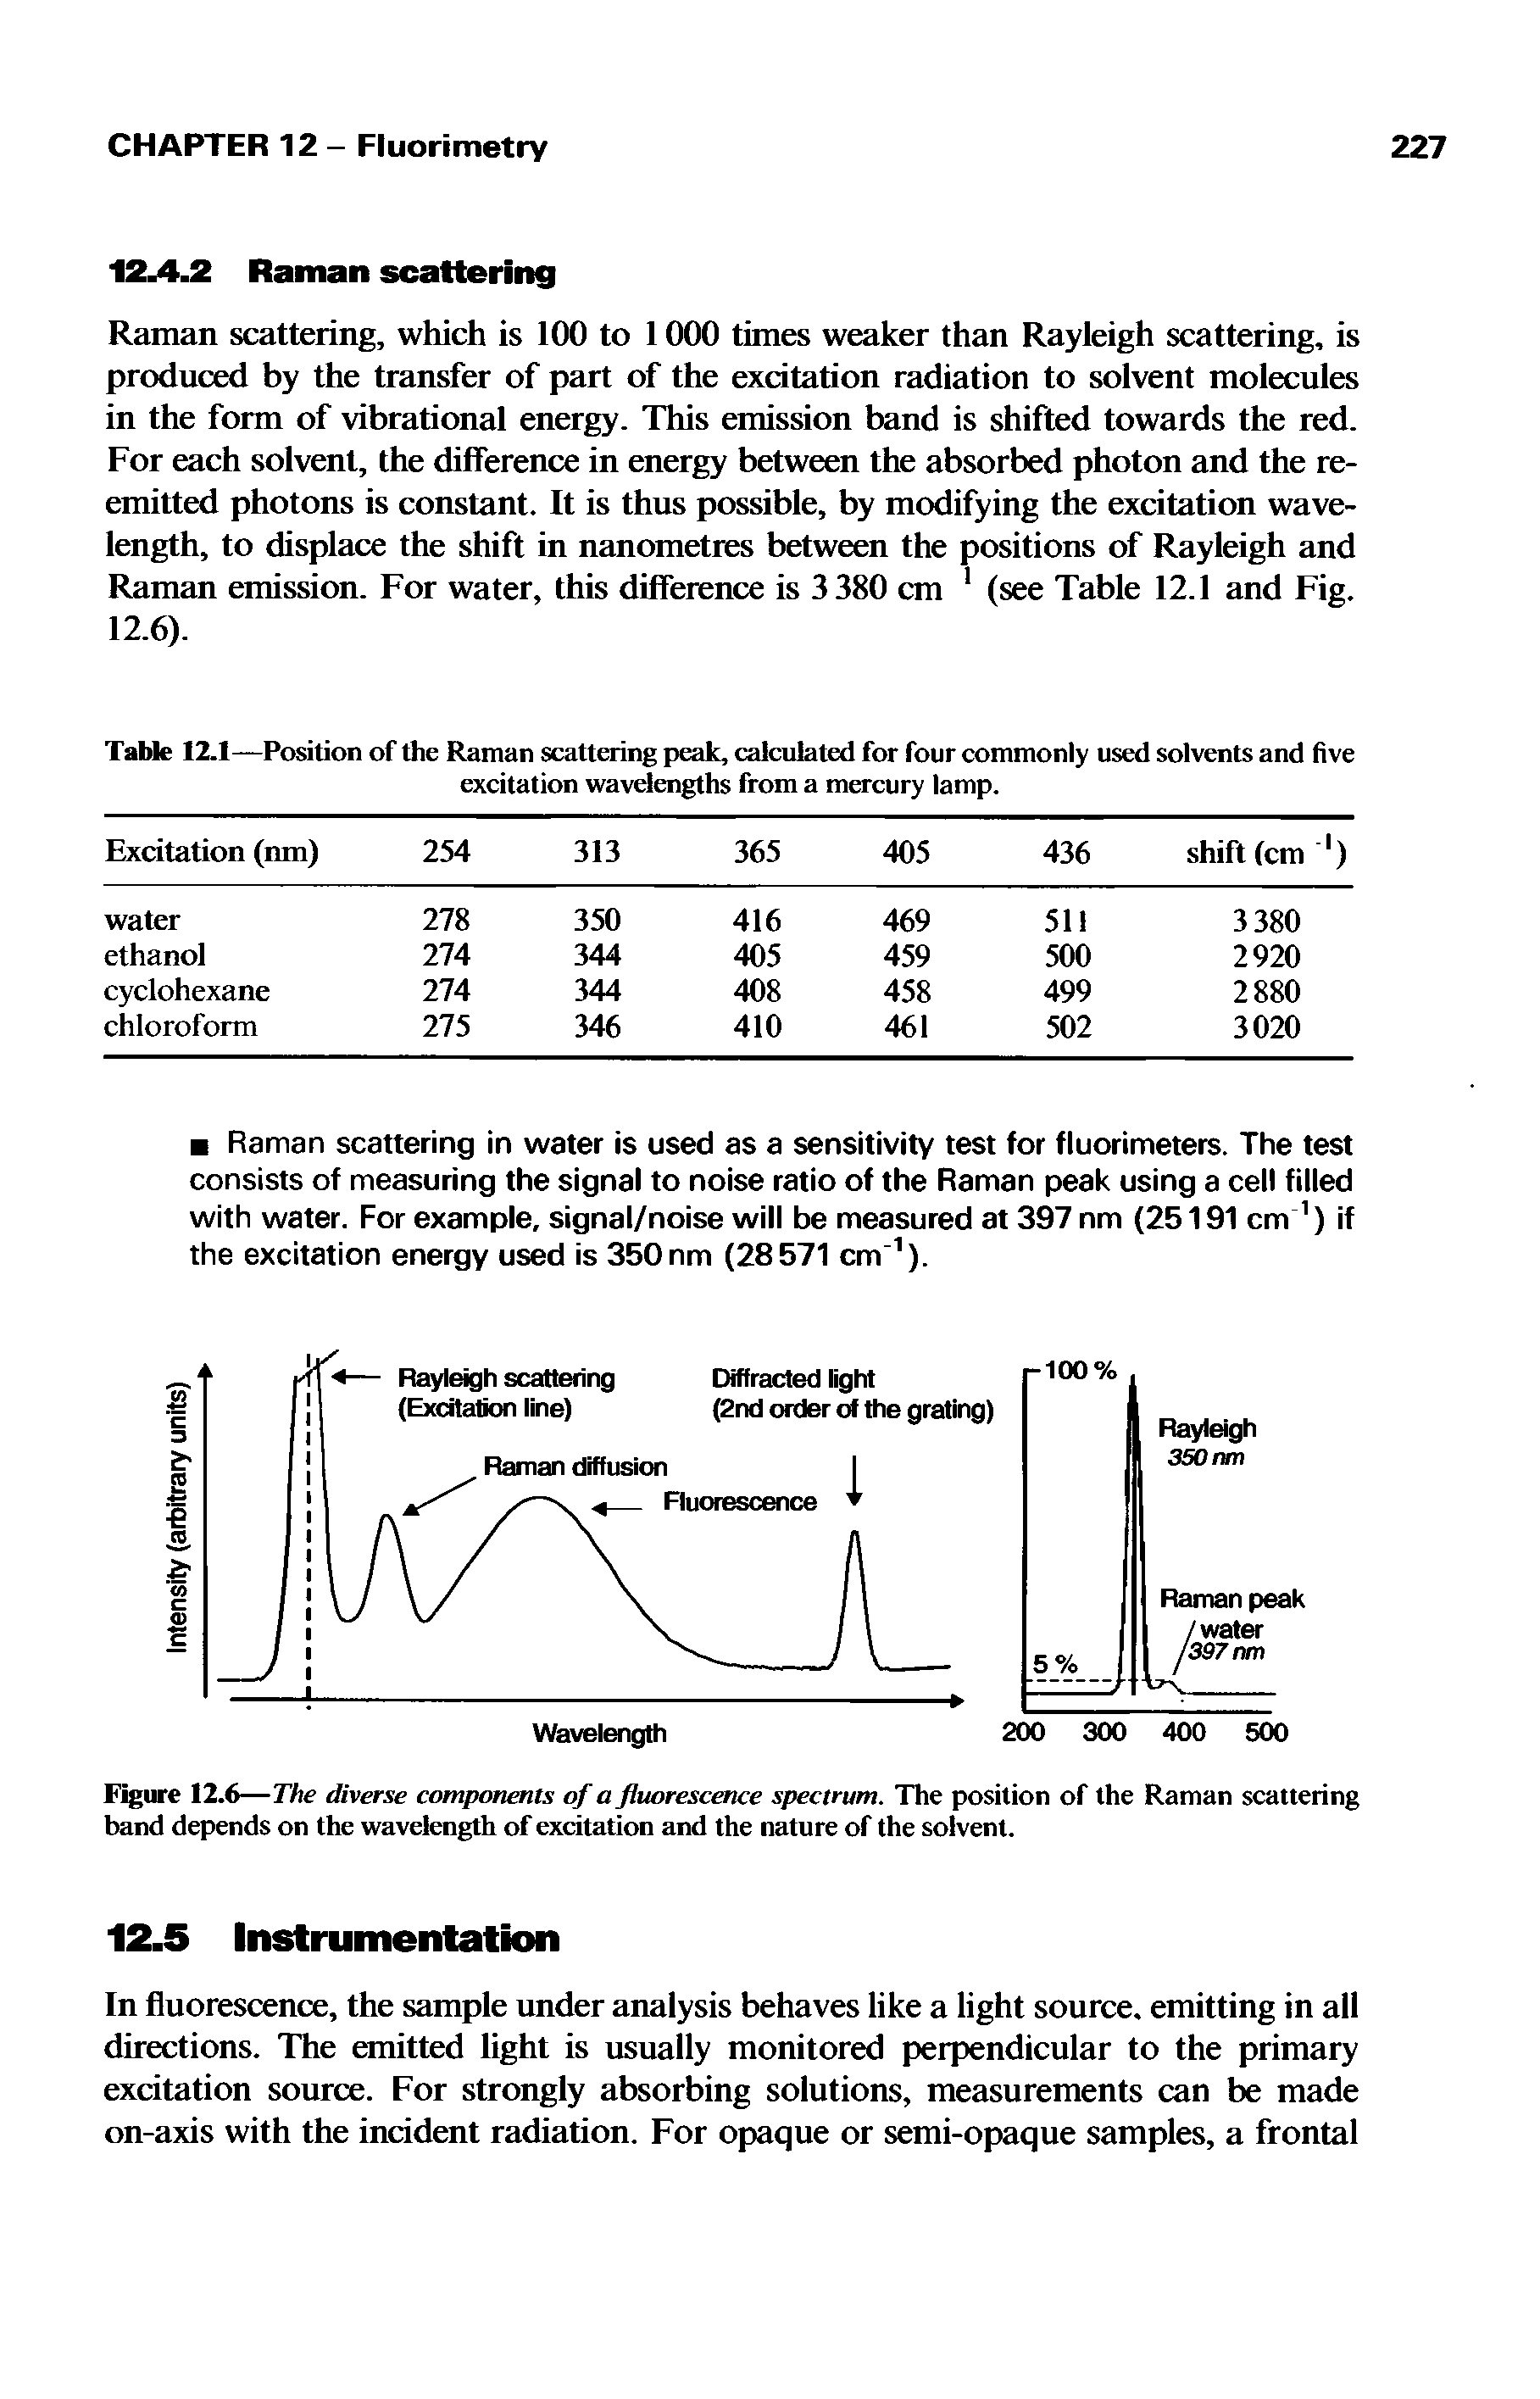 Table 12.1—Position of the Raman scattering peak, calculated for four commonly used solvents and five excitation wavelengths from a mercury lamp.